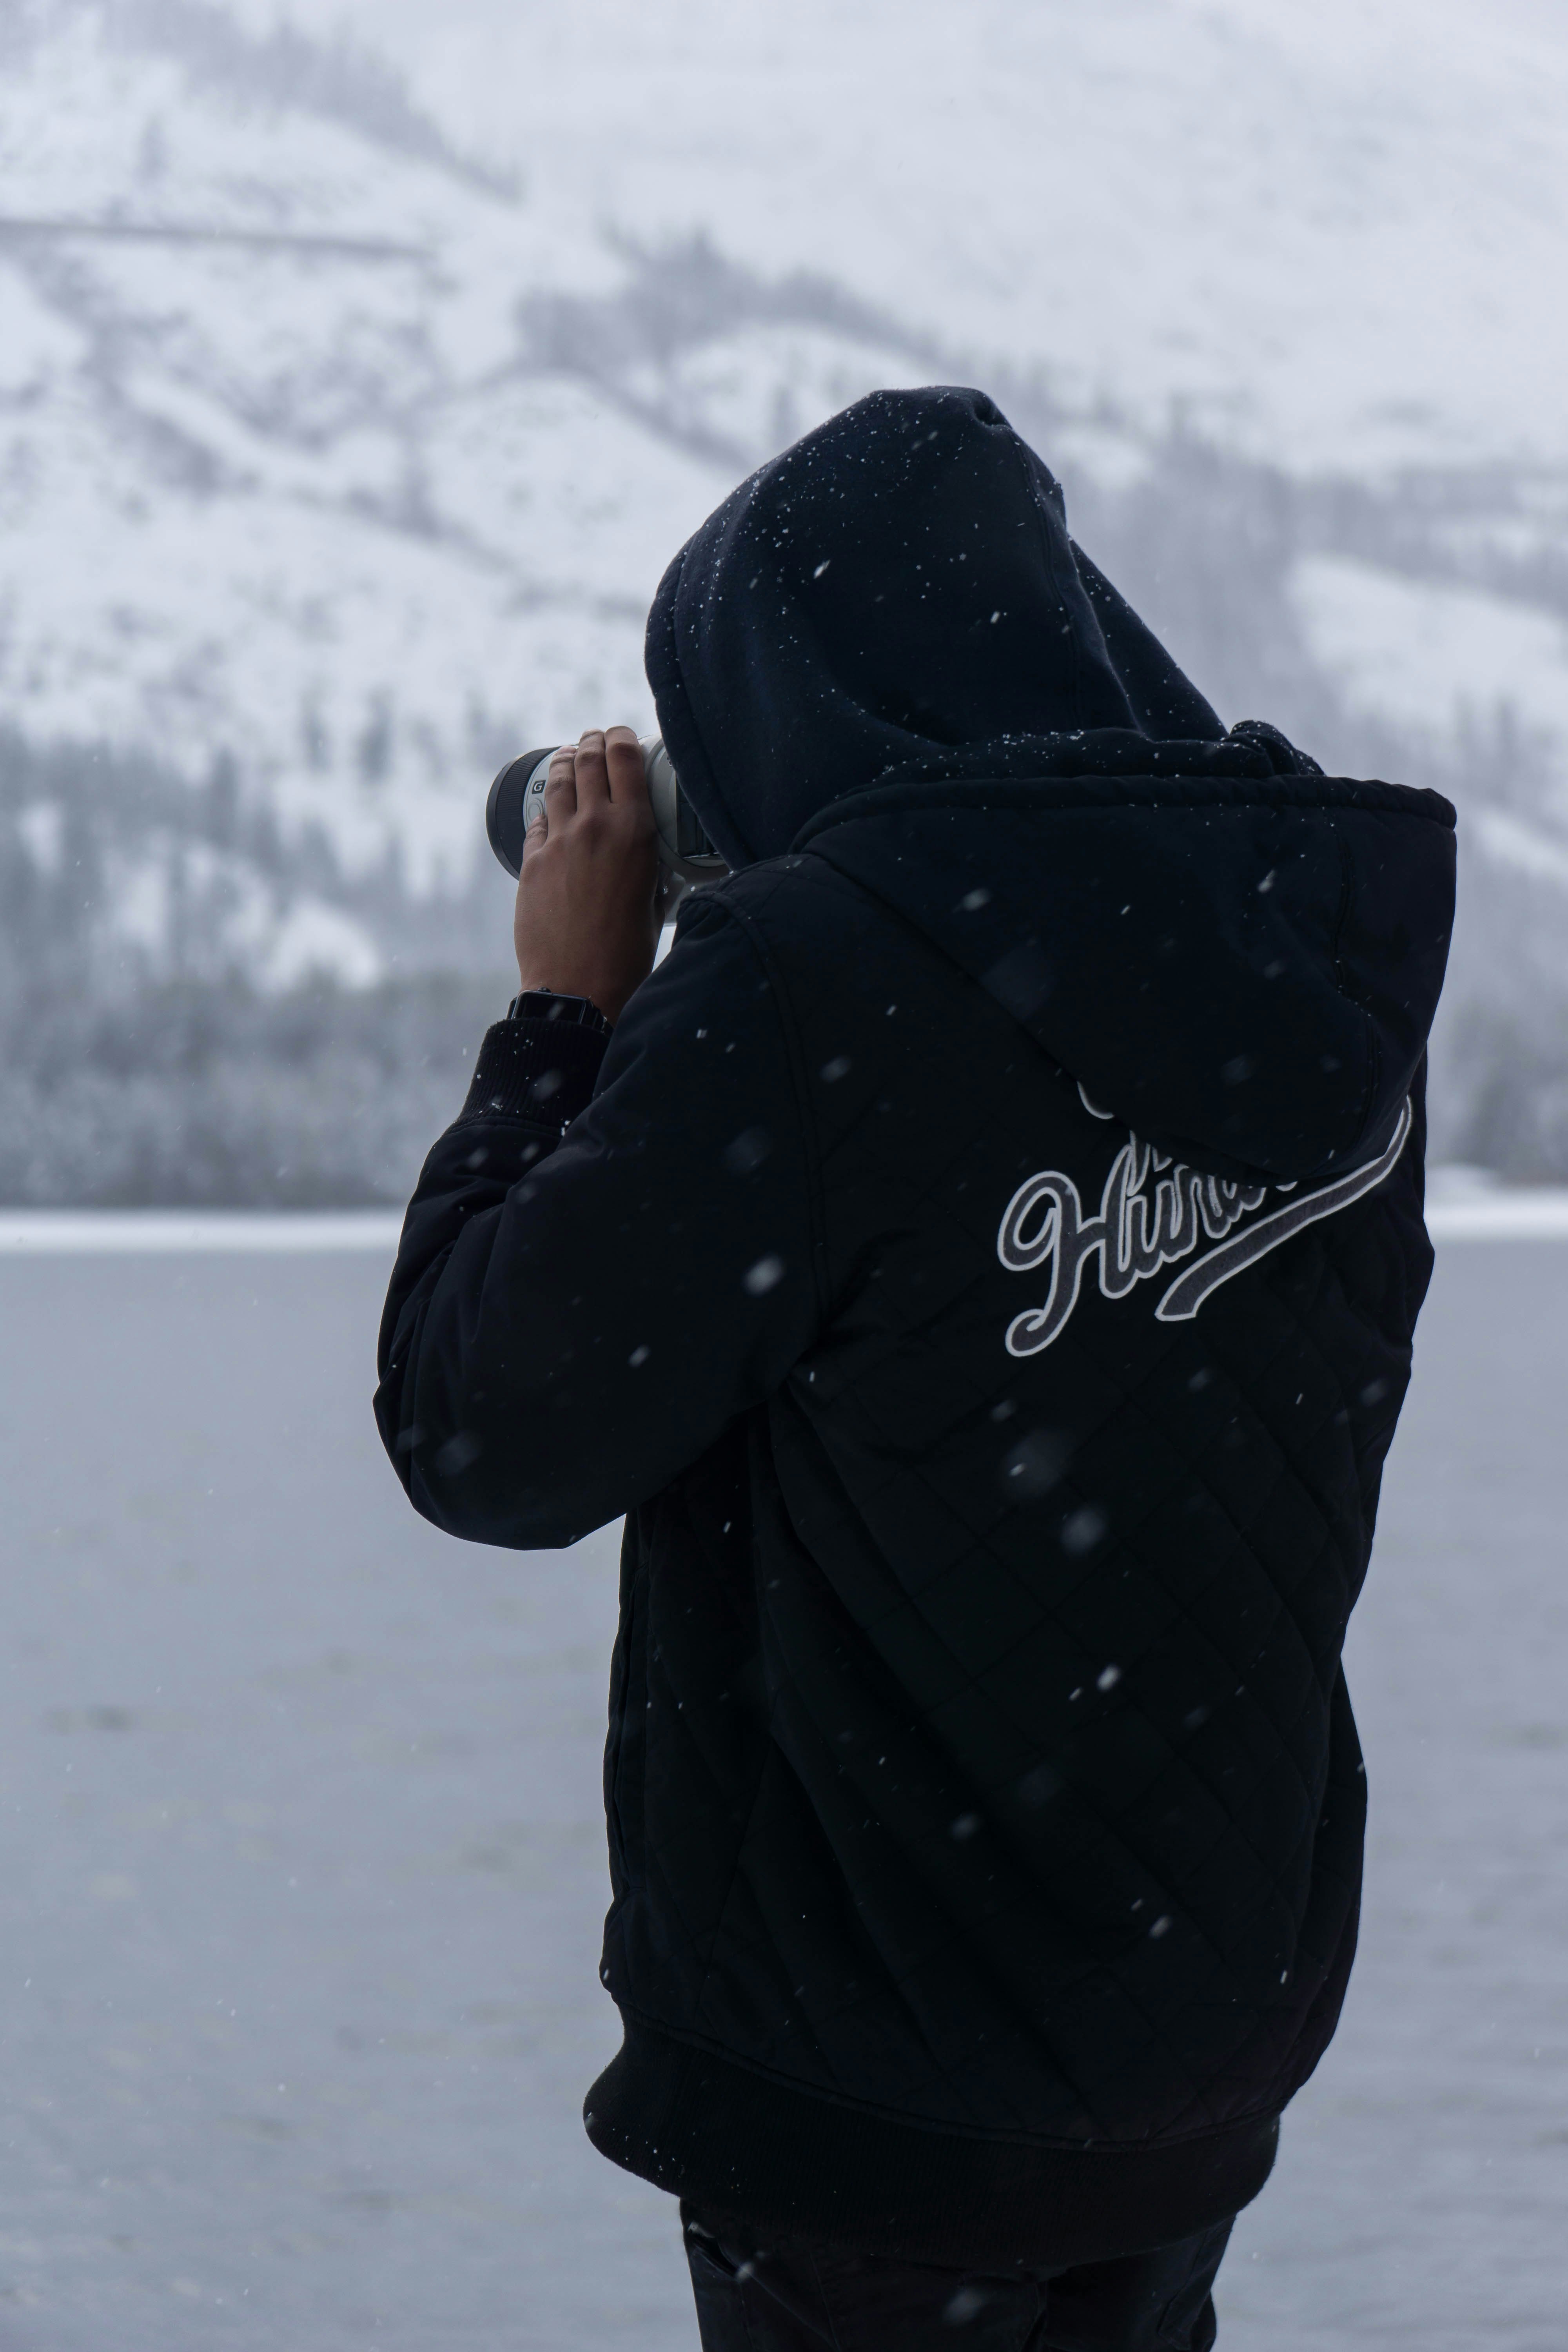 man wears hoodie takes picture during winter